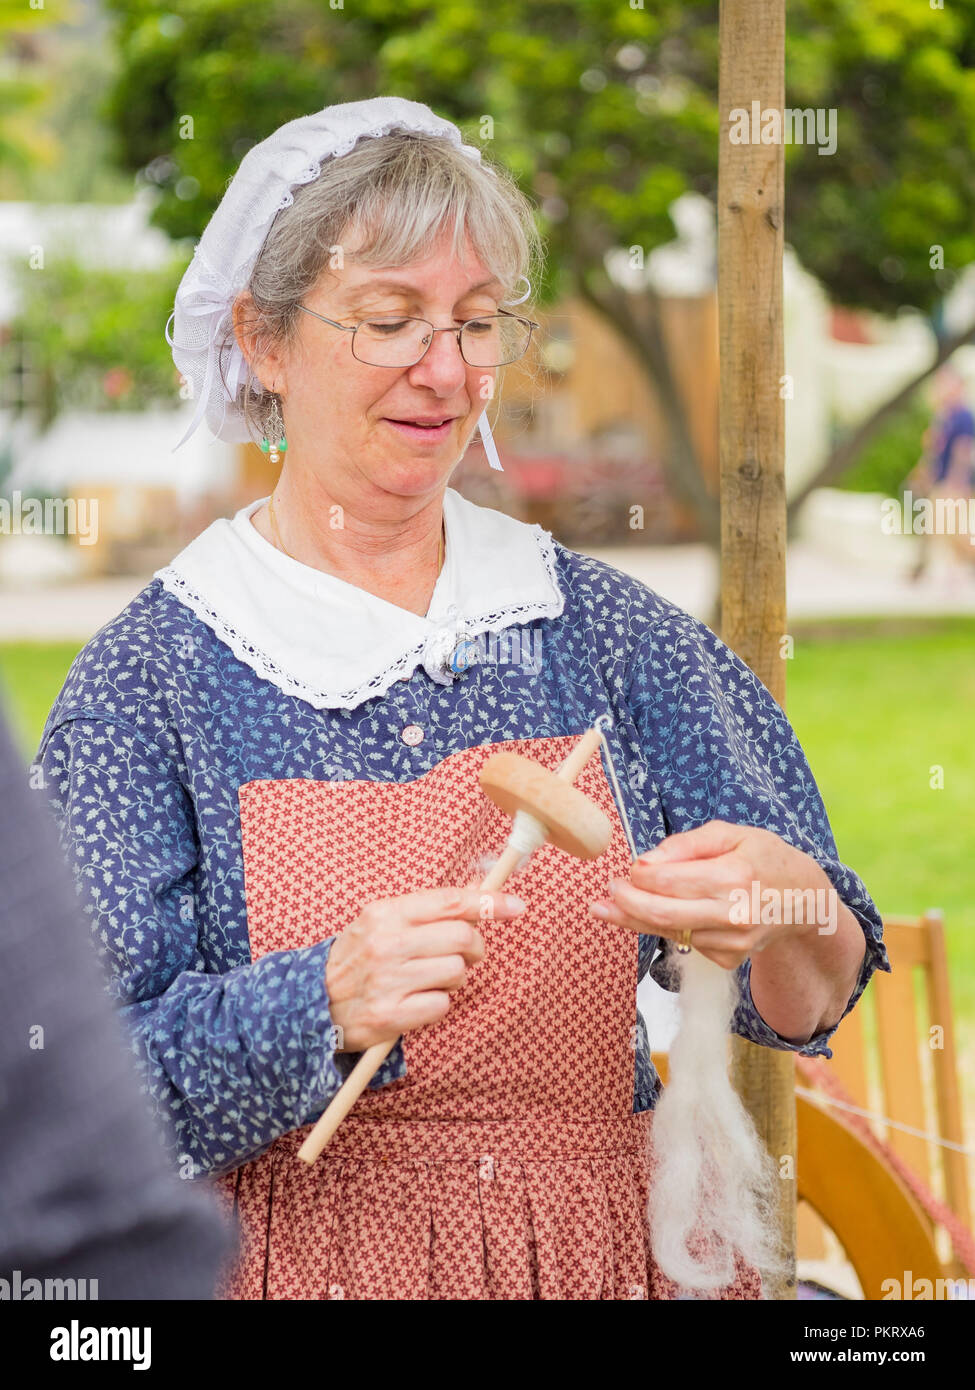 San Diego, AUG 2: People costume in ancient style weaving in the historical old town on AUG 2, 2014 at San Diego, California Stock Photo